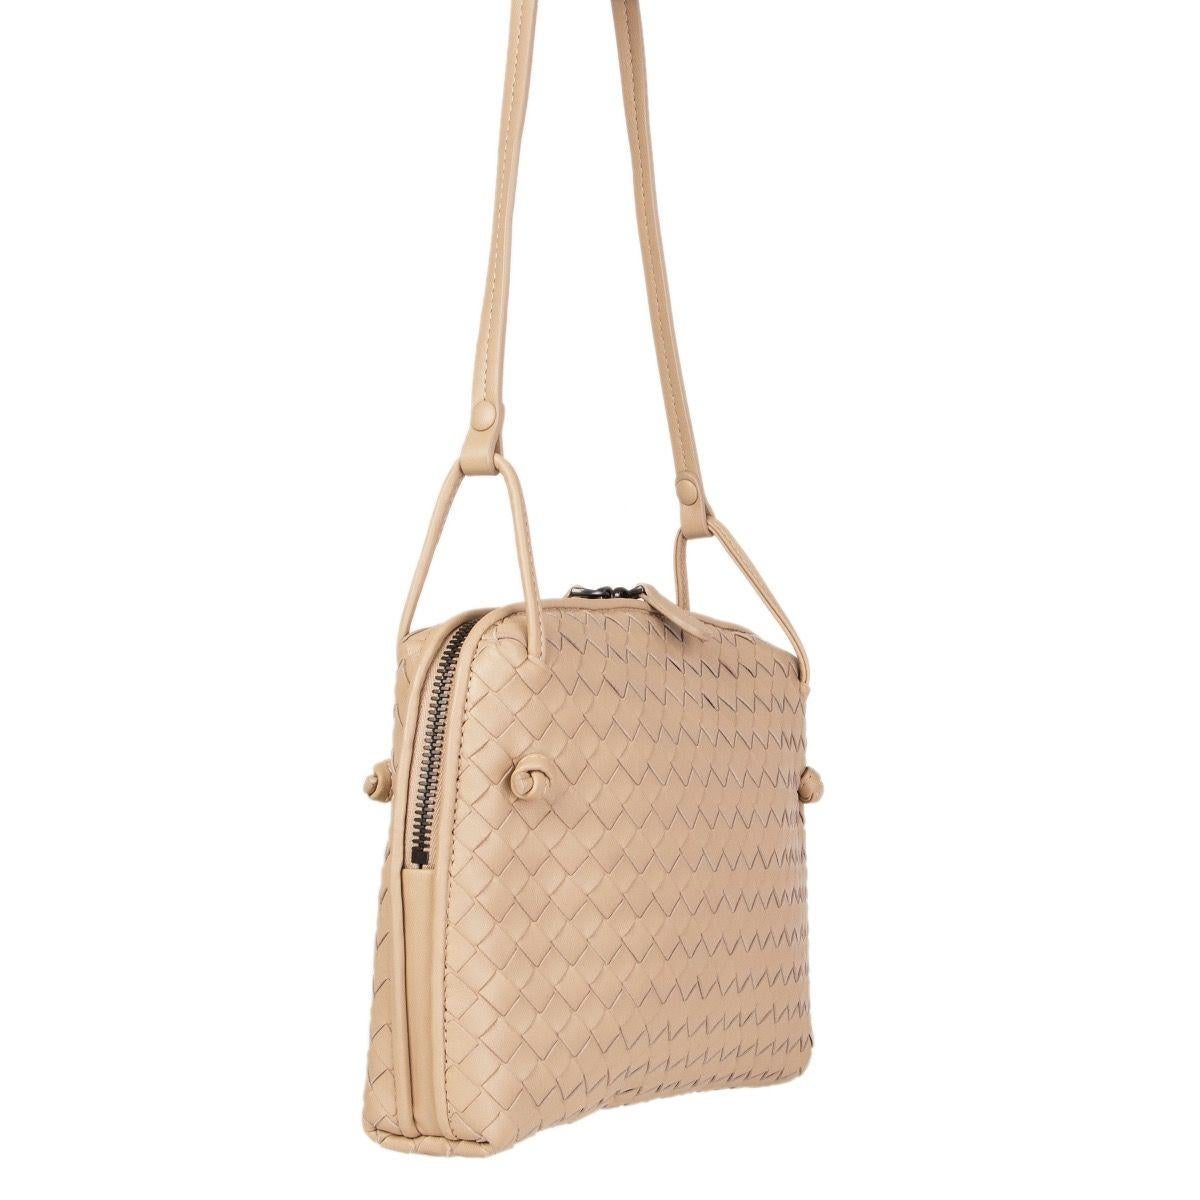 Bottega Veneta 'Nodini' cross-body in sand woven nappa leather. Opens with a two-way zipper on top. Lined in dark taupe suede with one open pocket against the front and a zipper pocket against the back. Has an adjustable shoulder strap. Comes with a